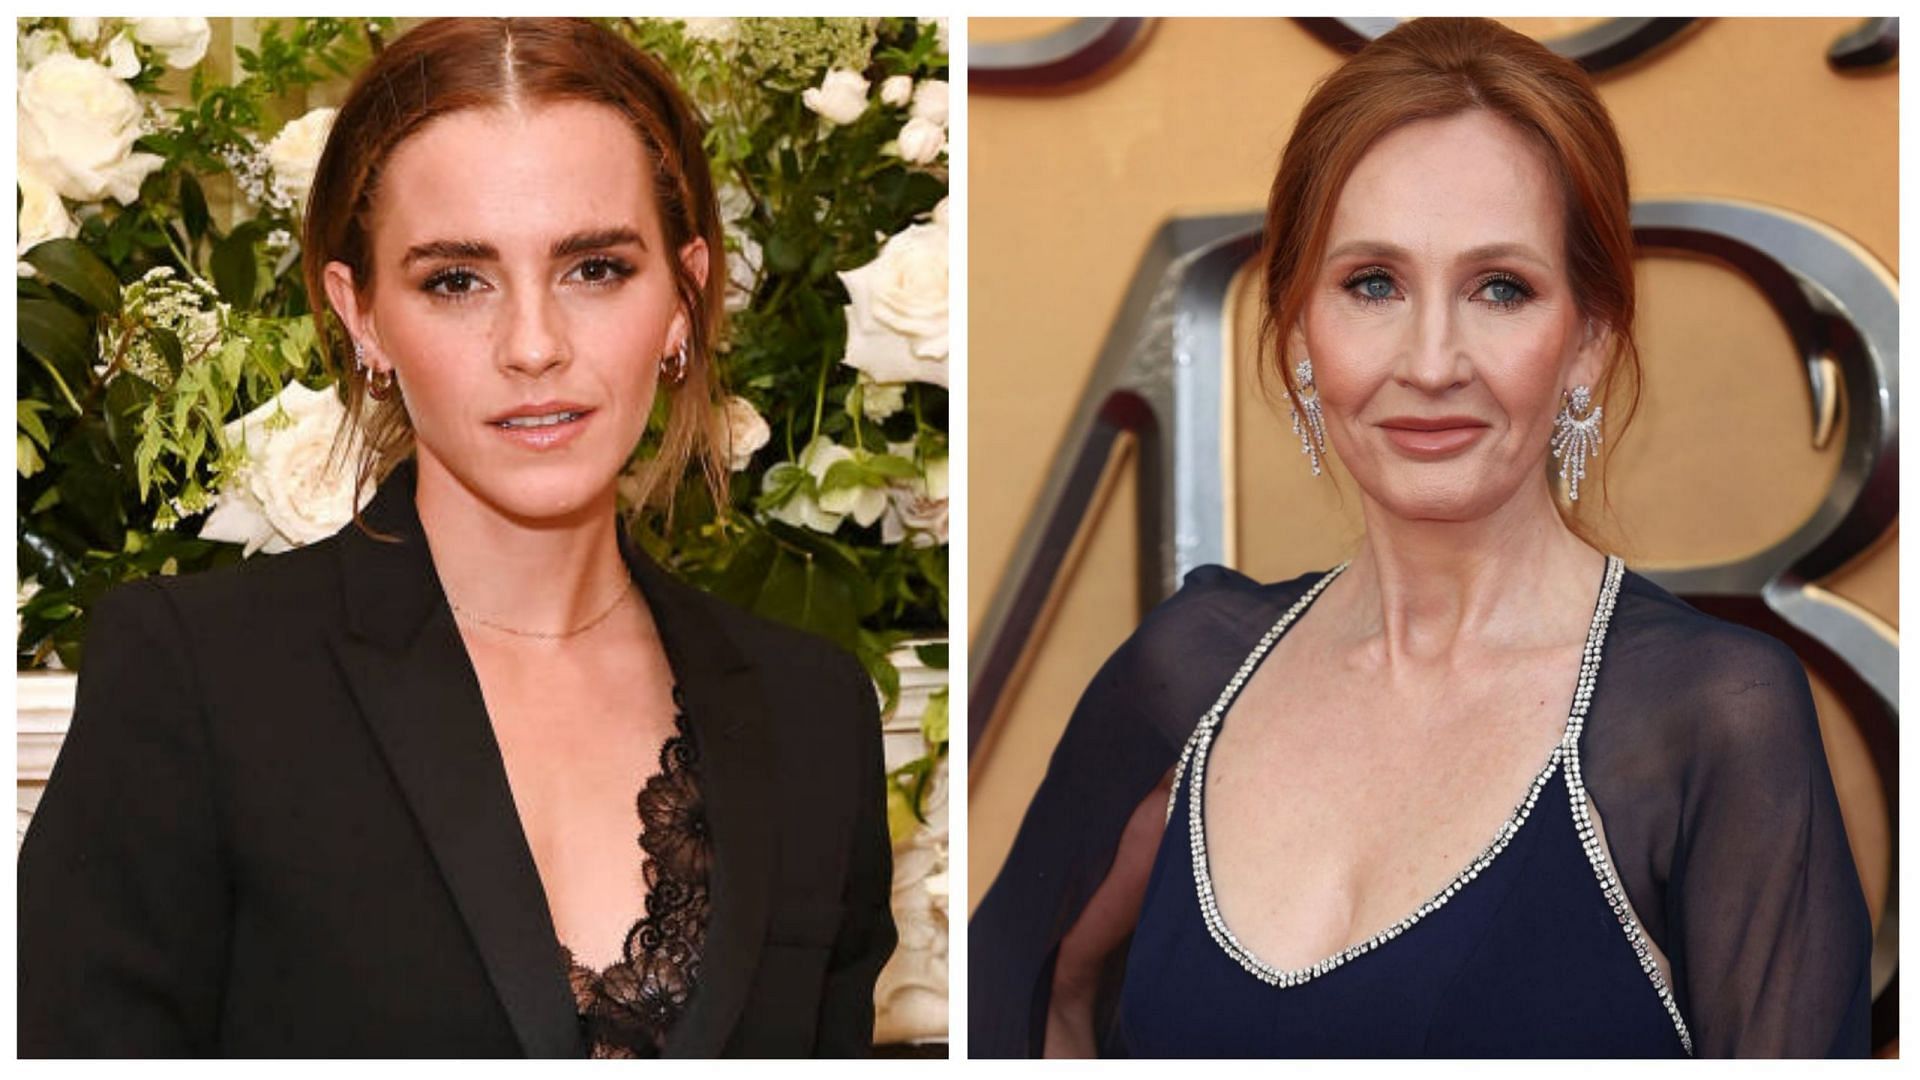 Emma Watson is unwilling to work on a new Harry Potter movie if JK Rowling is involved (Image via David M. Benett and Mike Marsland/Getty Images)